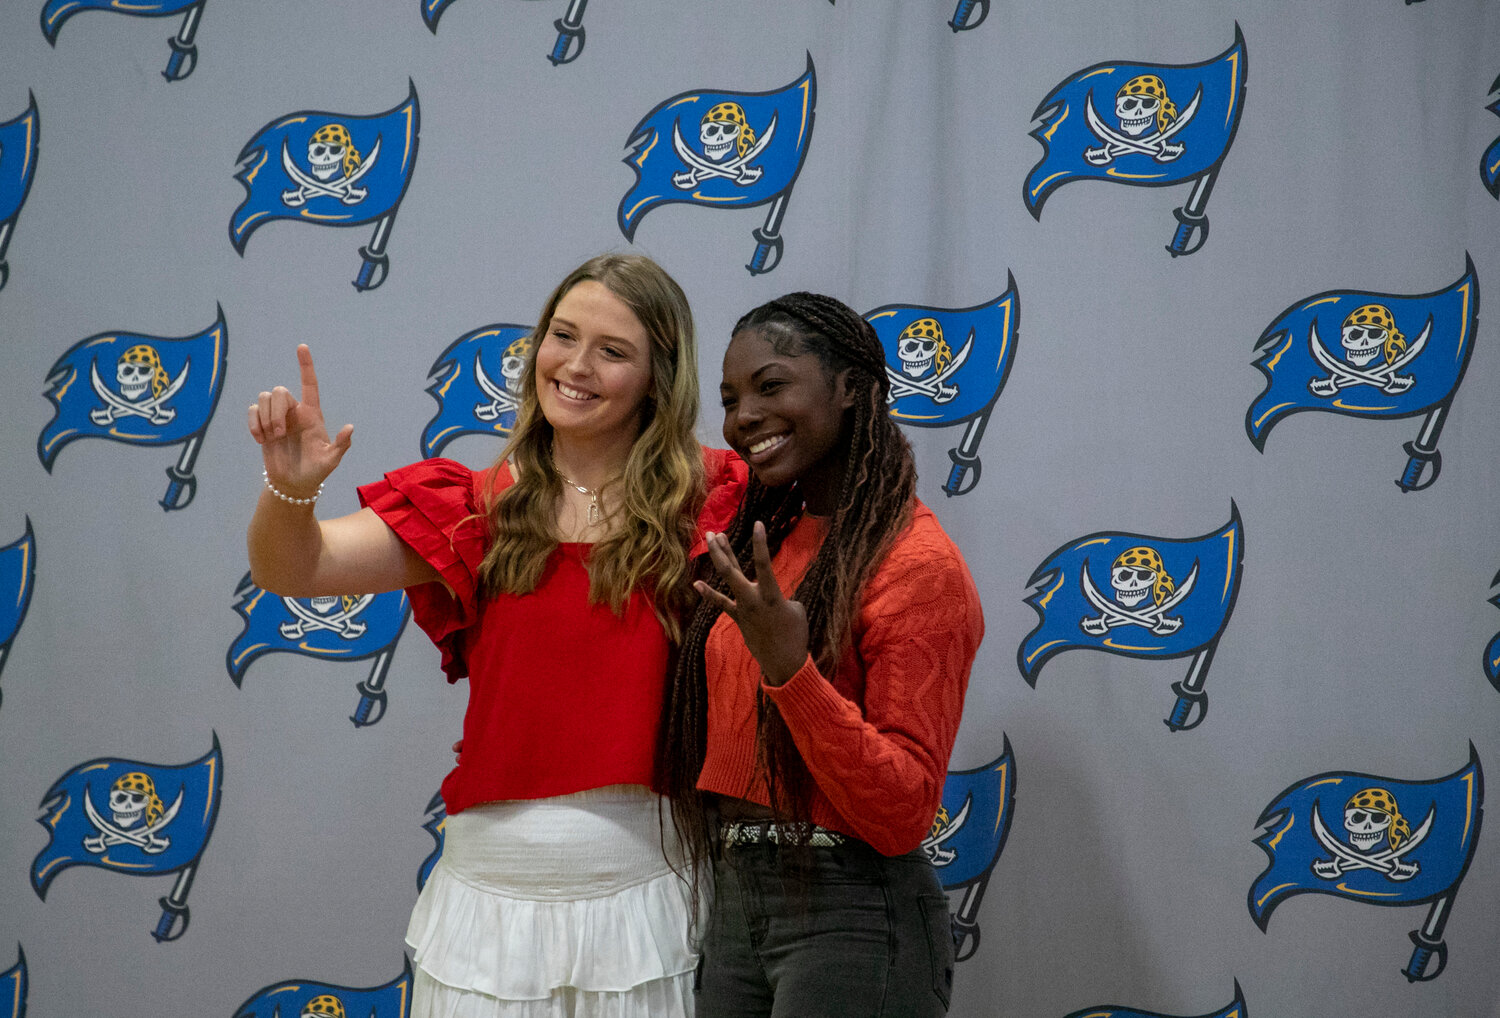 Softball players Ryley Harrison and Edy Gavin throw up the hand signs for their future colleges, South Alabama and Wallace State, after the April 17 signing ceremony at Fairhope High School. The pair of Pirates have helped their team to a No. 4 state ranking where both have registered a batting average over .400.